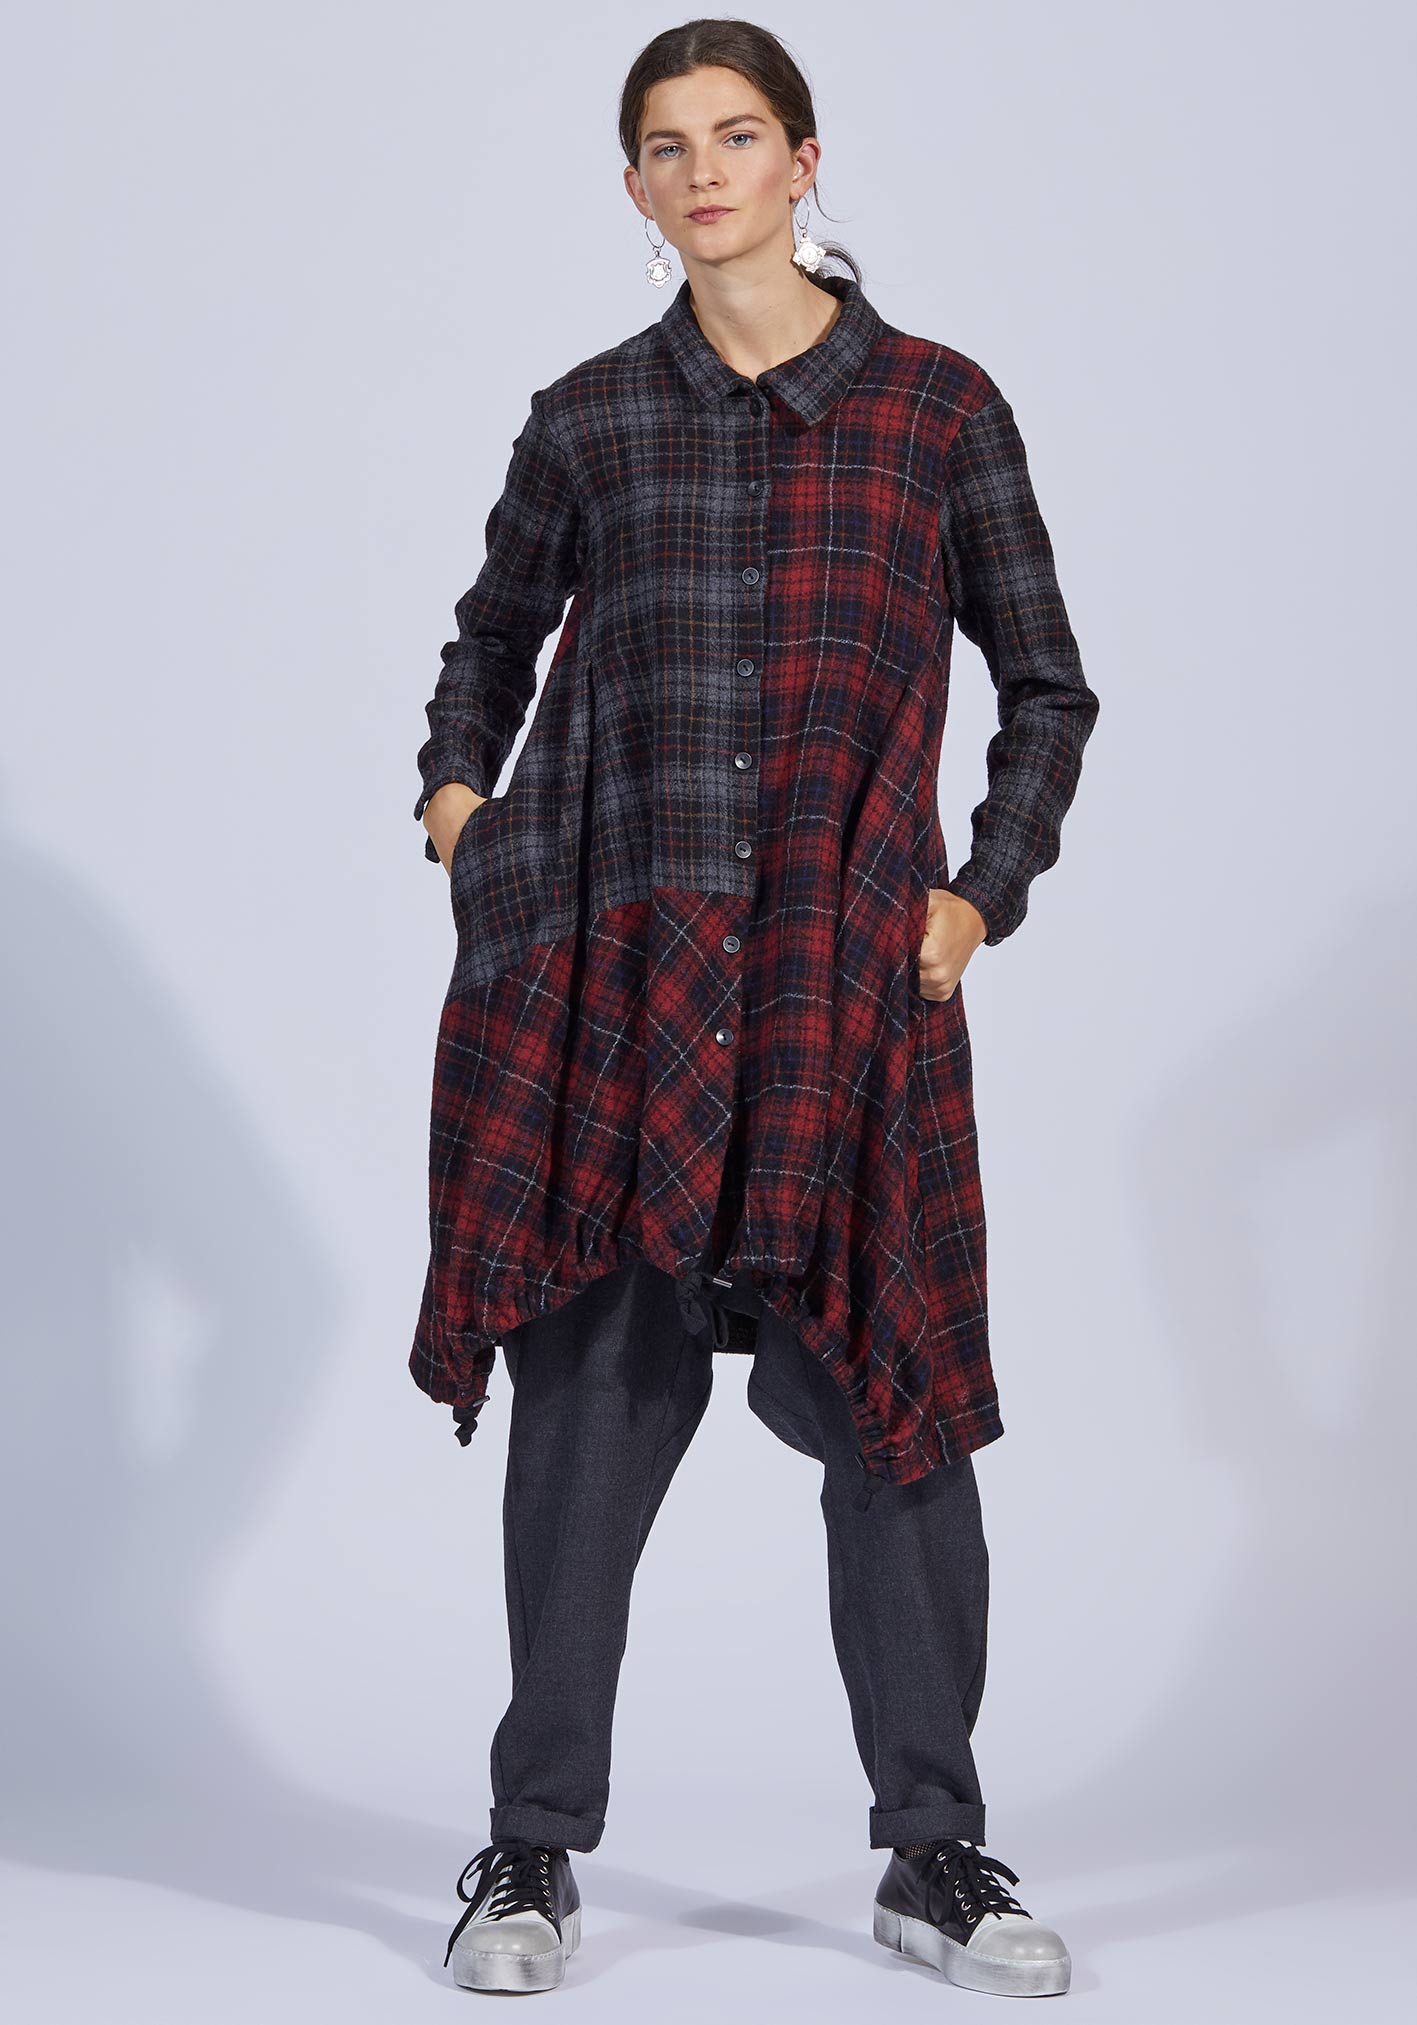 buy the latest Cross Section Drawcord Shirt Jacket (Wool Plaid) online